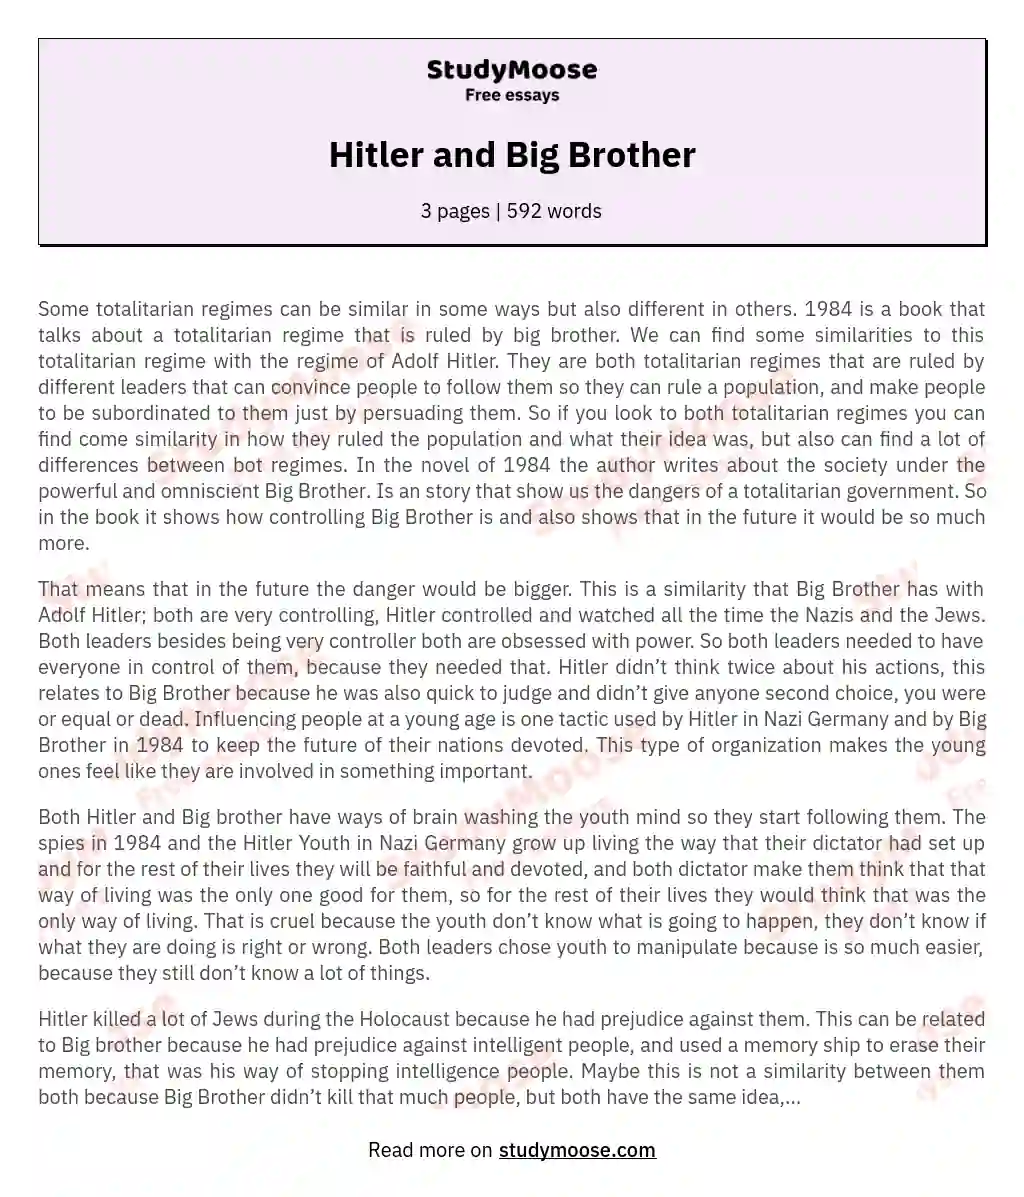 Hitler and Big Brother essay